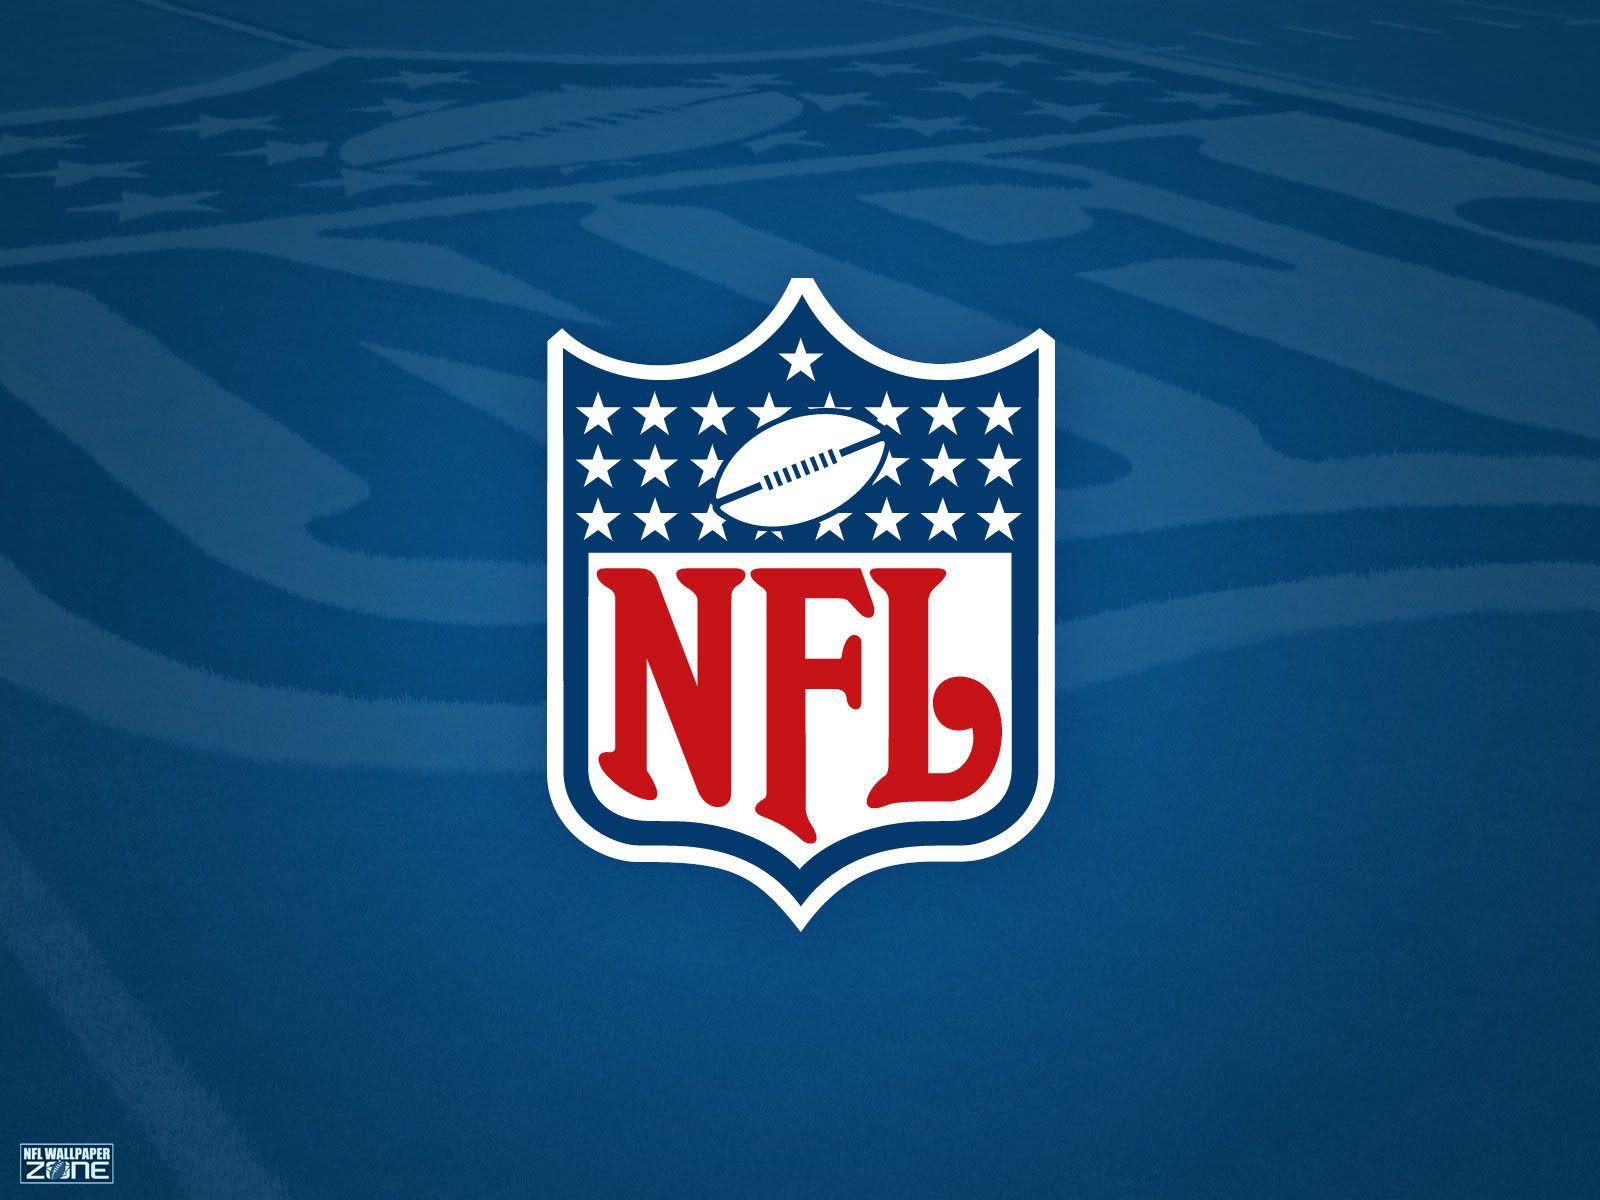 Cool NFL Logo - NFL Wallpaper - Wallpapers Browse